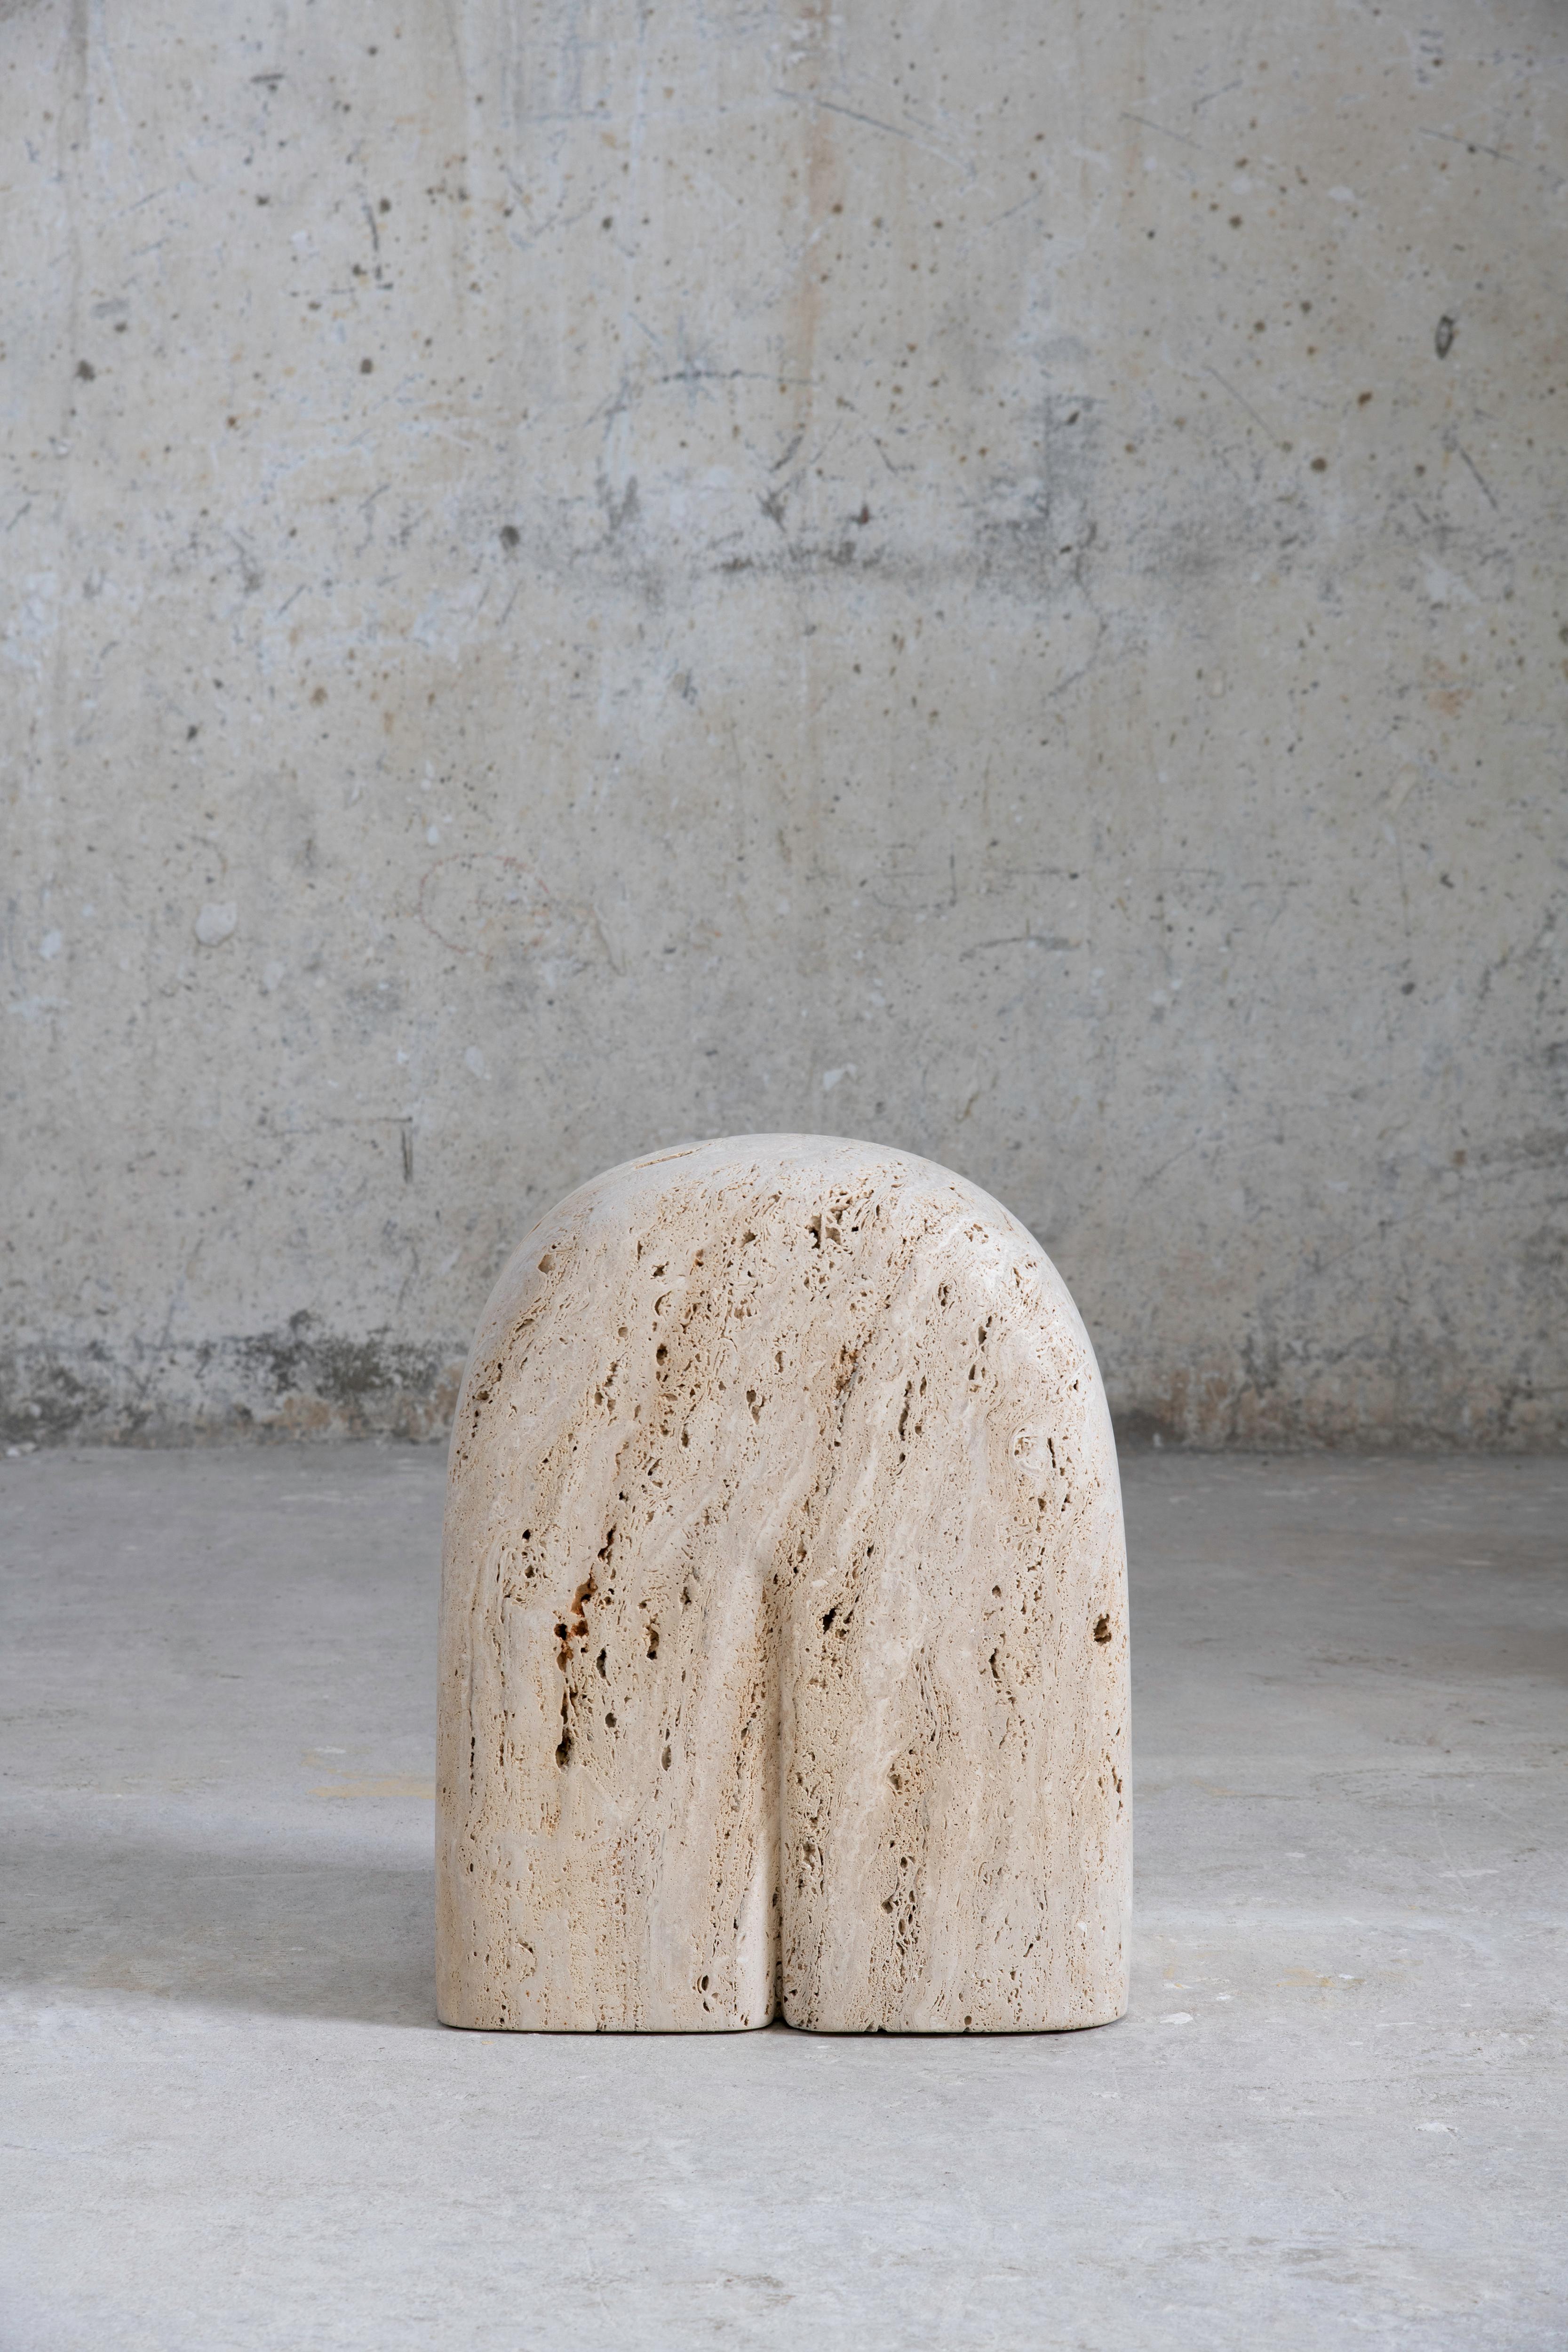 Seduction, f, 2018
Italian travertine. Edition of 5.
Dimensions: 17.5 x 12.5 x 11.5 inches; 44.5 x 32 x 29.5 cm.

Najla El Zein was born in Beirut in 1983, and graduated from École Camondo, Paris, France with a BA in Product Design and an MA in